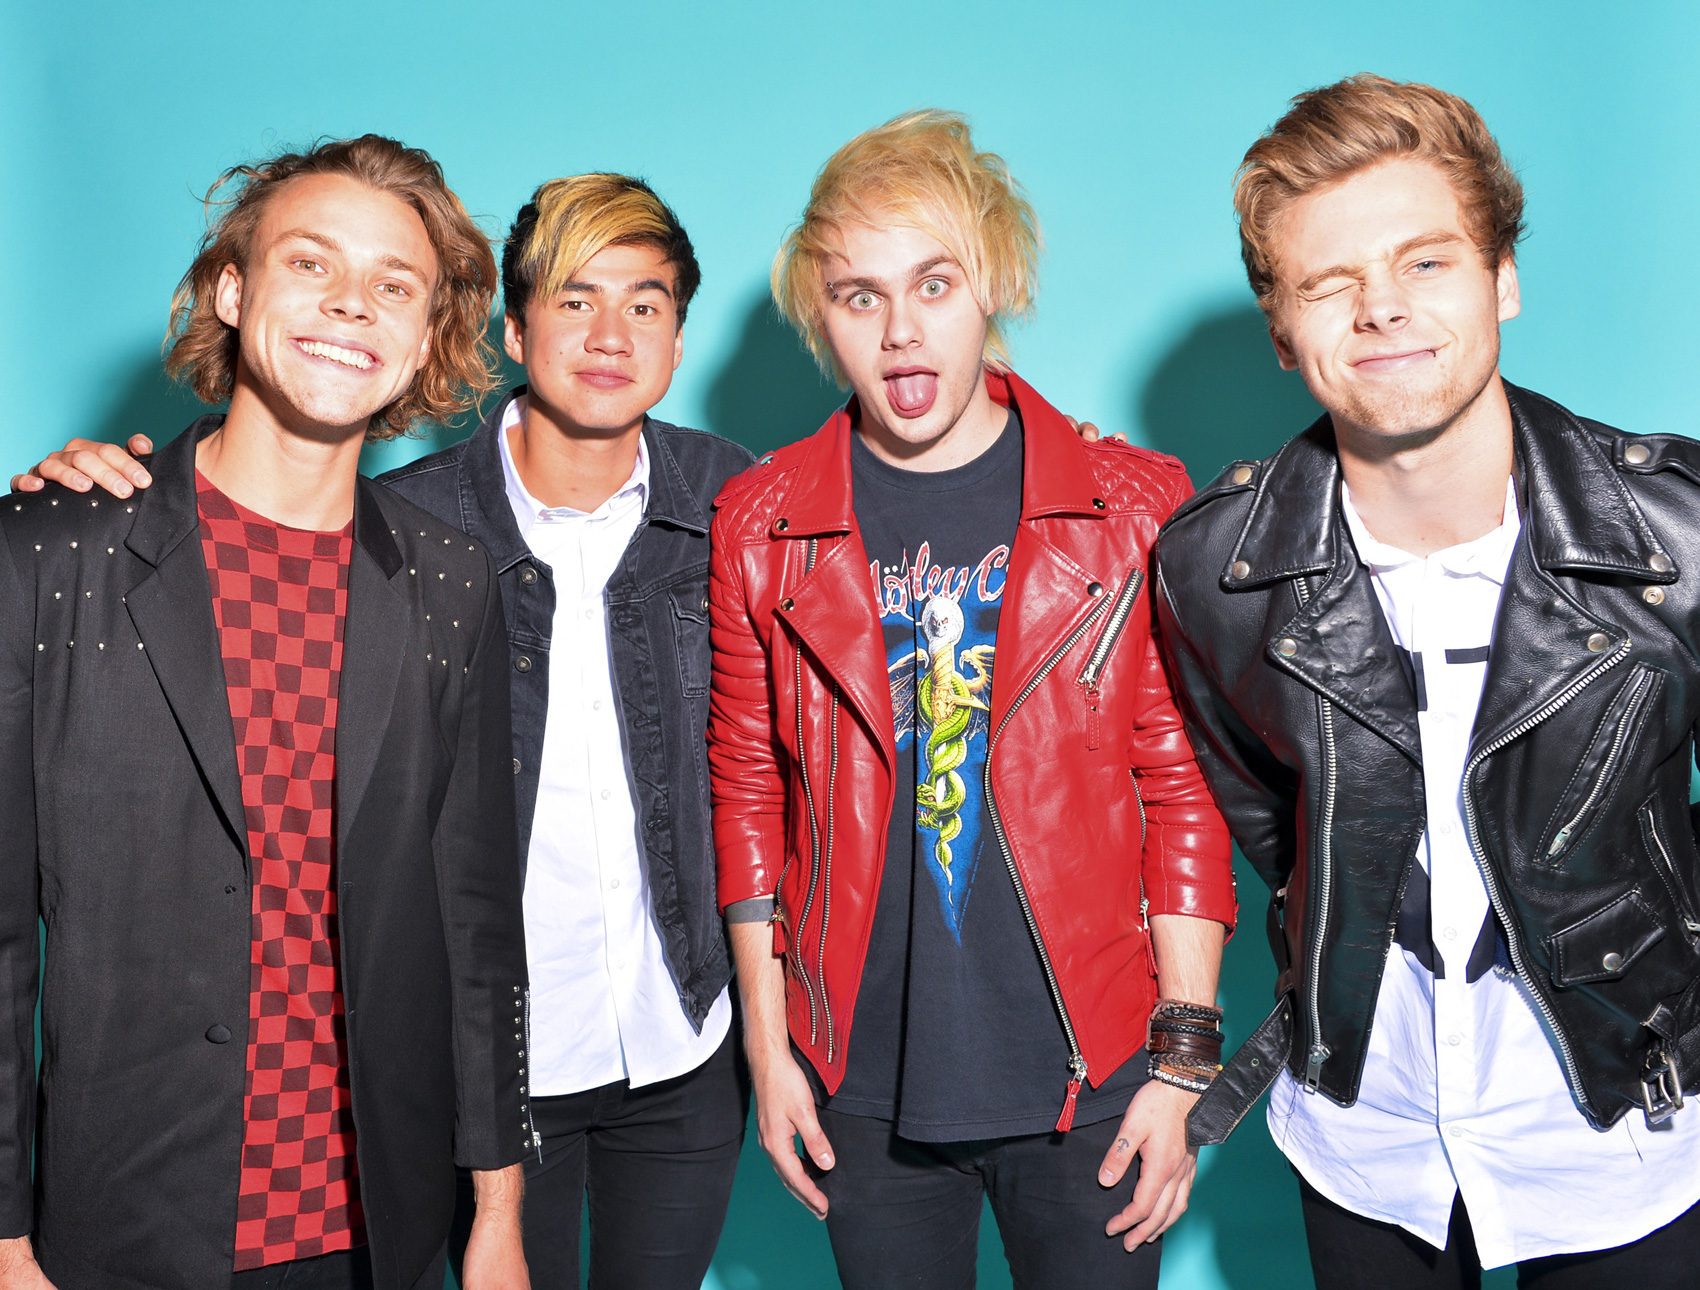 Here’s how much 5SOS’s world tour grossed